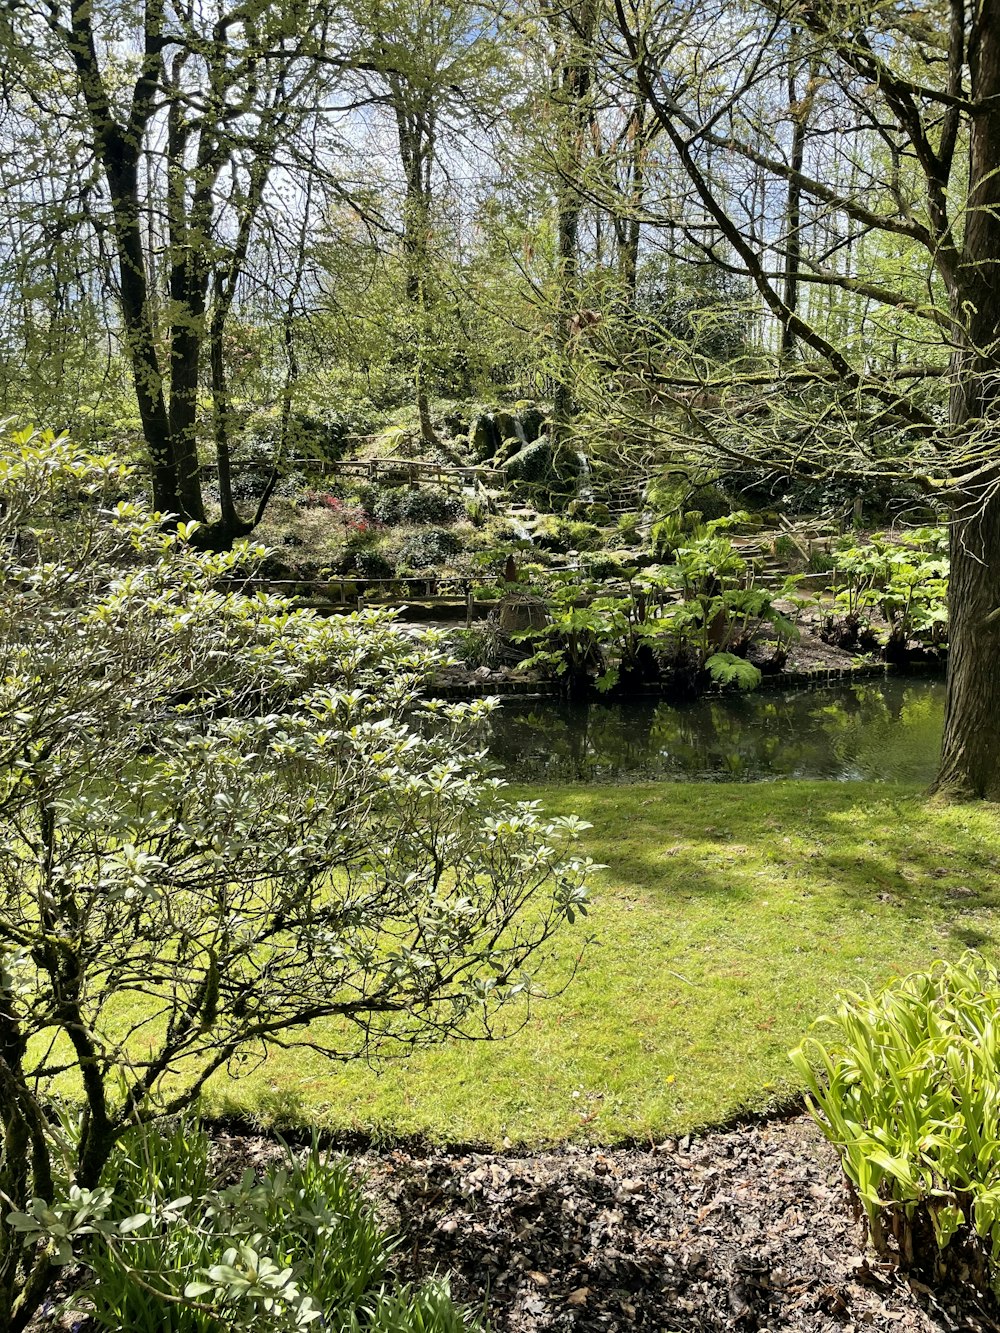 a small pond surrounded by trees and grass